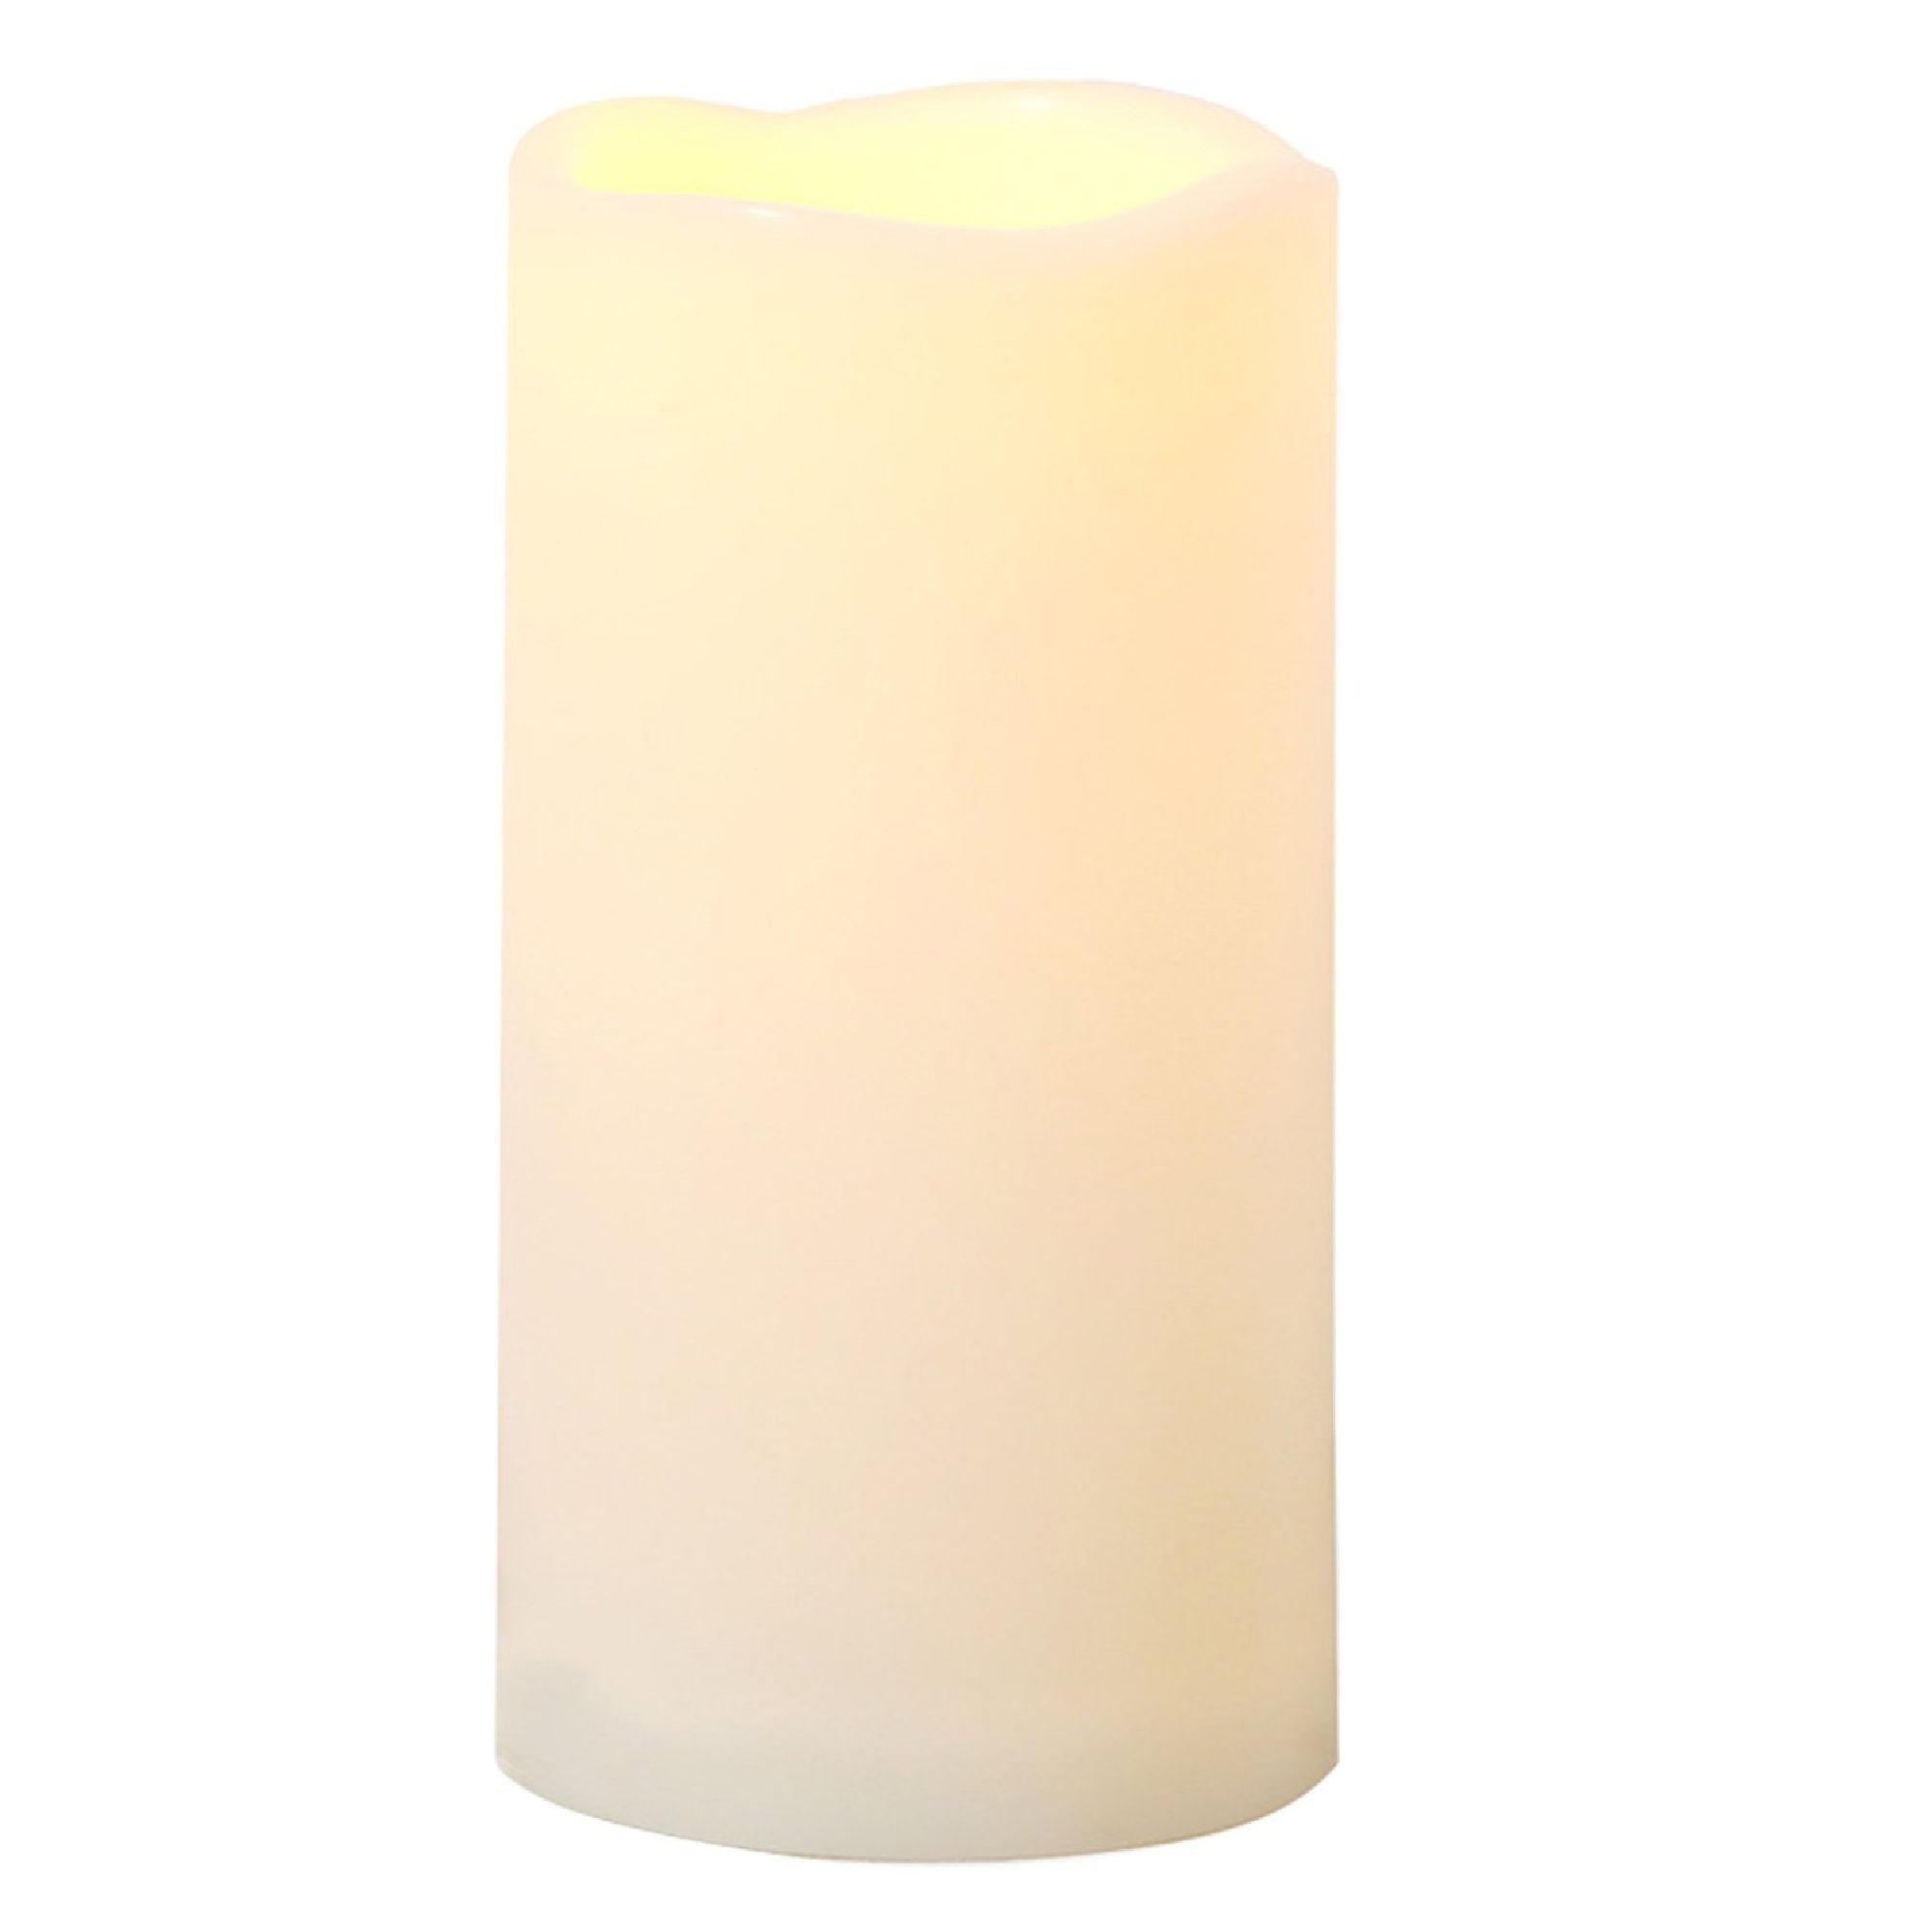 Large Flameless Candles 4’’ x 6’’ Outdoor Waterproof LED Battery Operated Candles Flickering Plastic Resin Pillar Candles with Timer,Electric Lights for Home Indoor Lantern Patio Garden,2 Pack,Ivory 